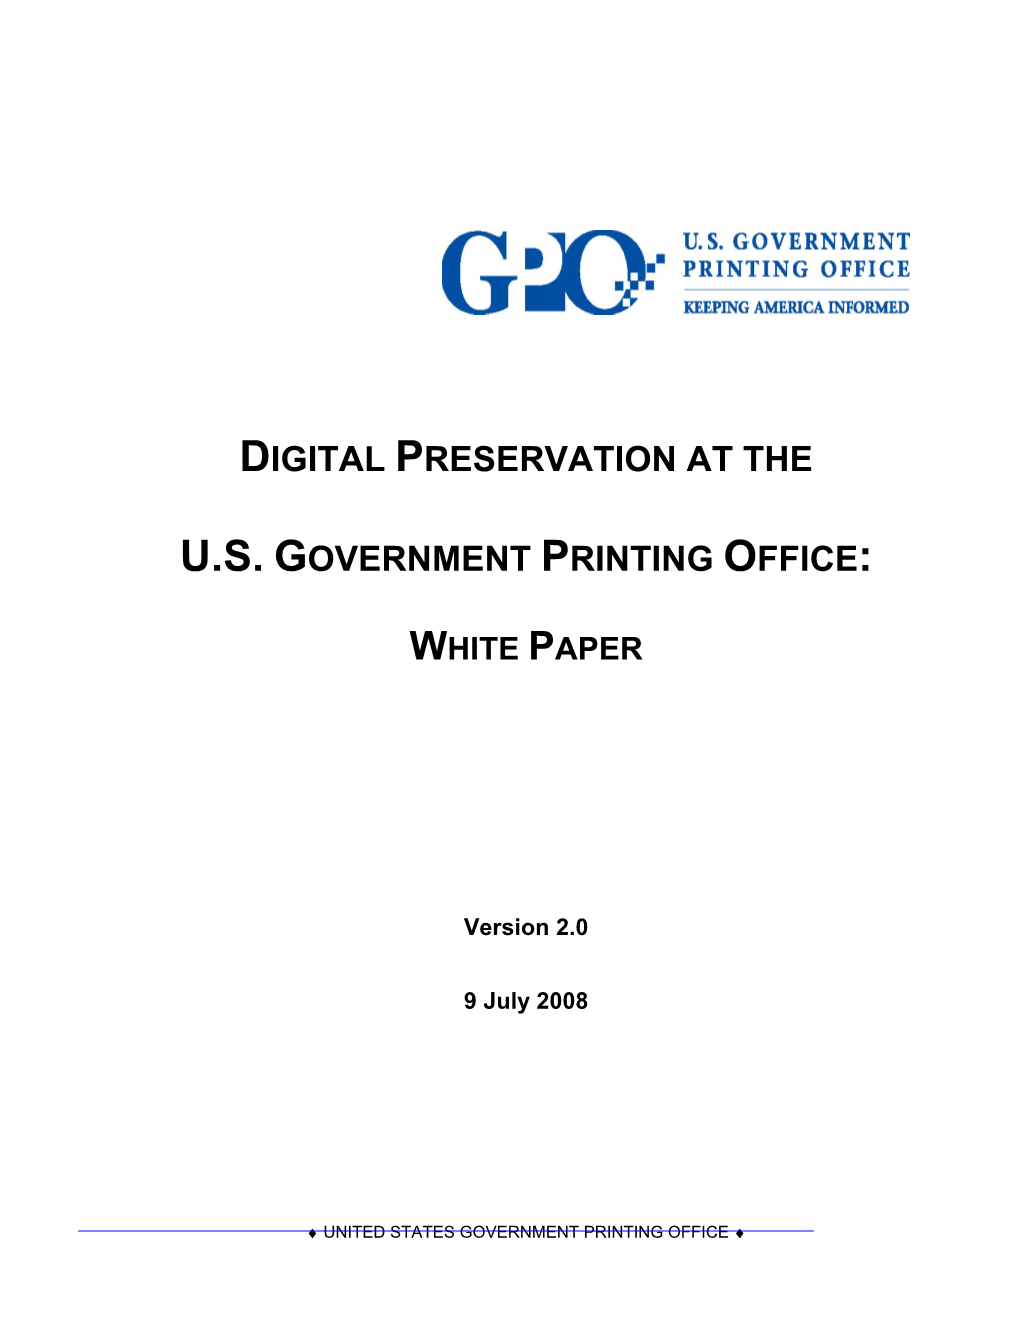 Digital Preservation at the Us Government Printing Office